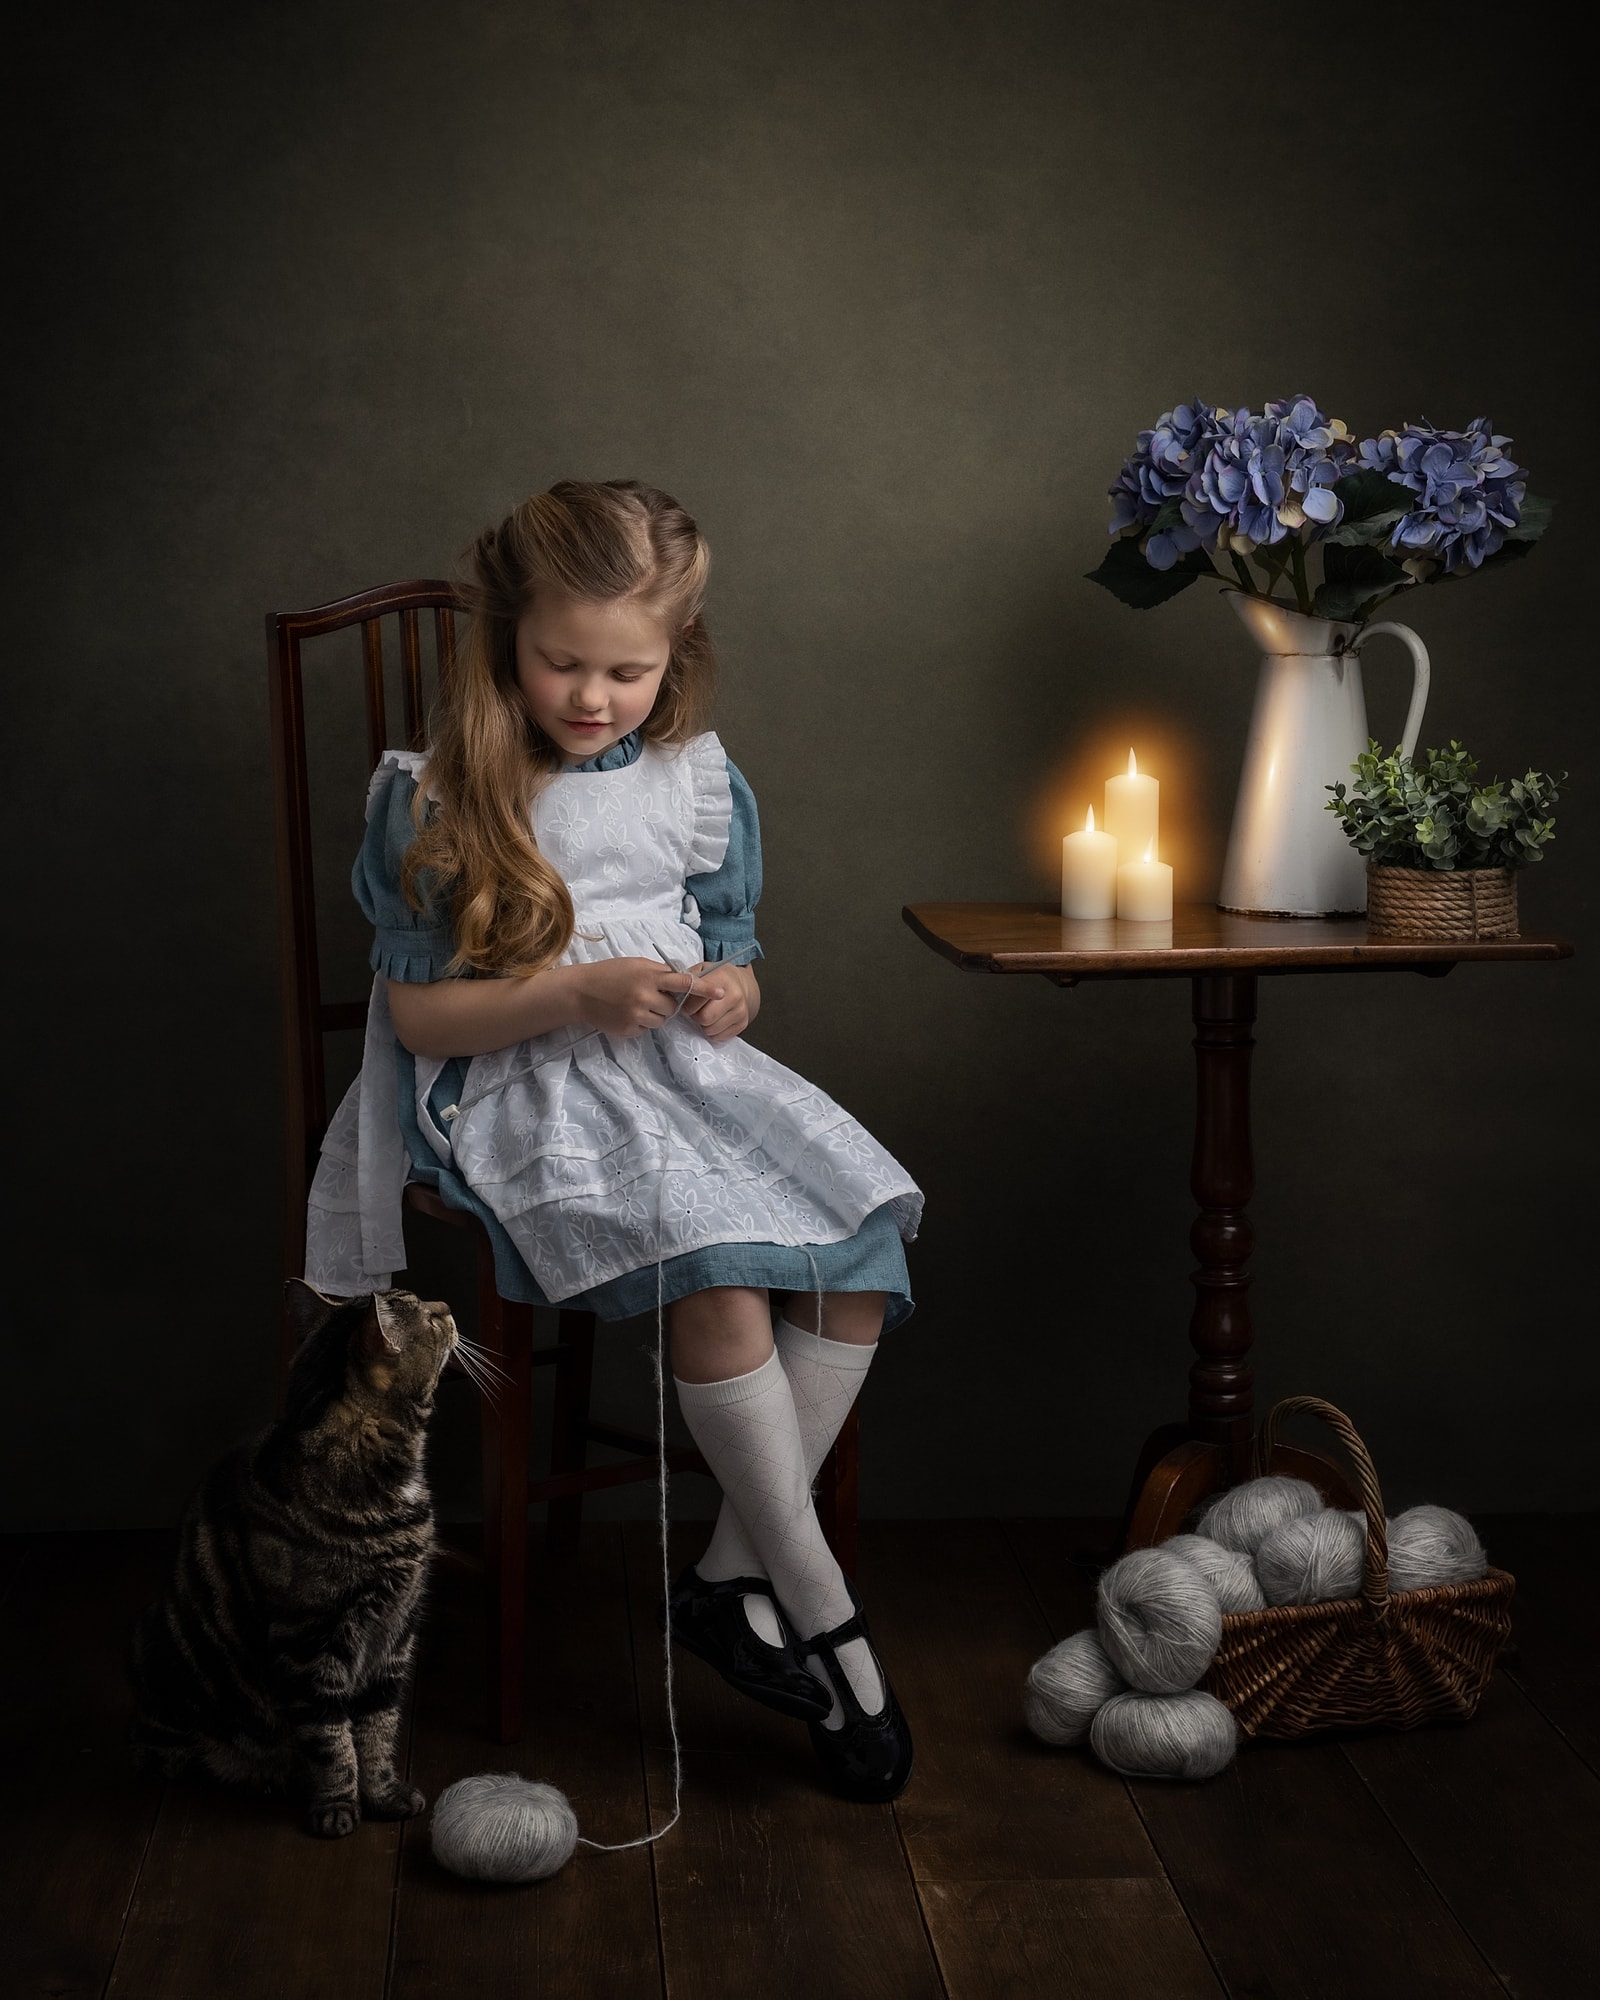 Little girl wearing a blue dress with white apron sits knitting against a dark background with her cat looking at her during fine art photoshoot at Suffolk Studio